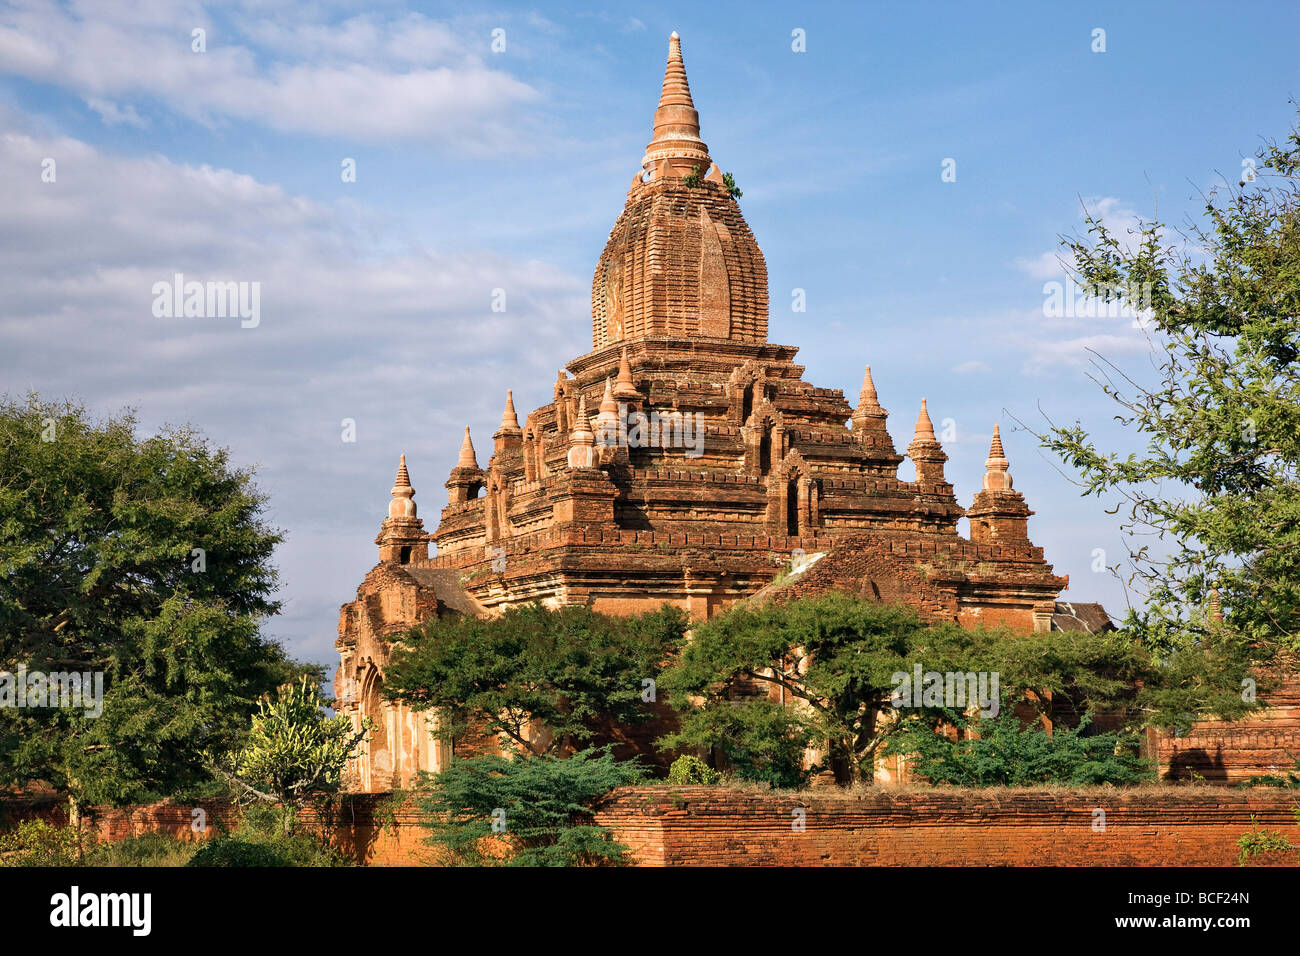 Myanmar. Burma. Bagan. One of the Seinnyet Sisters   temples built at Bagan in the 12th century. Stock Photo